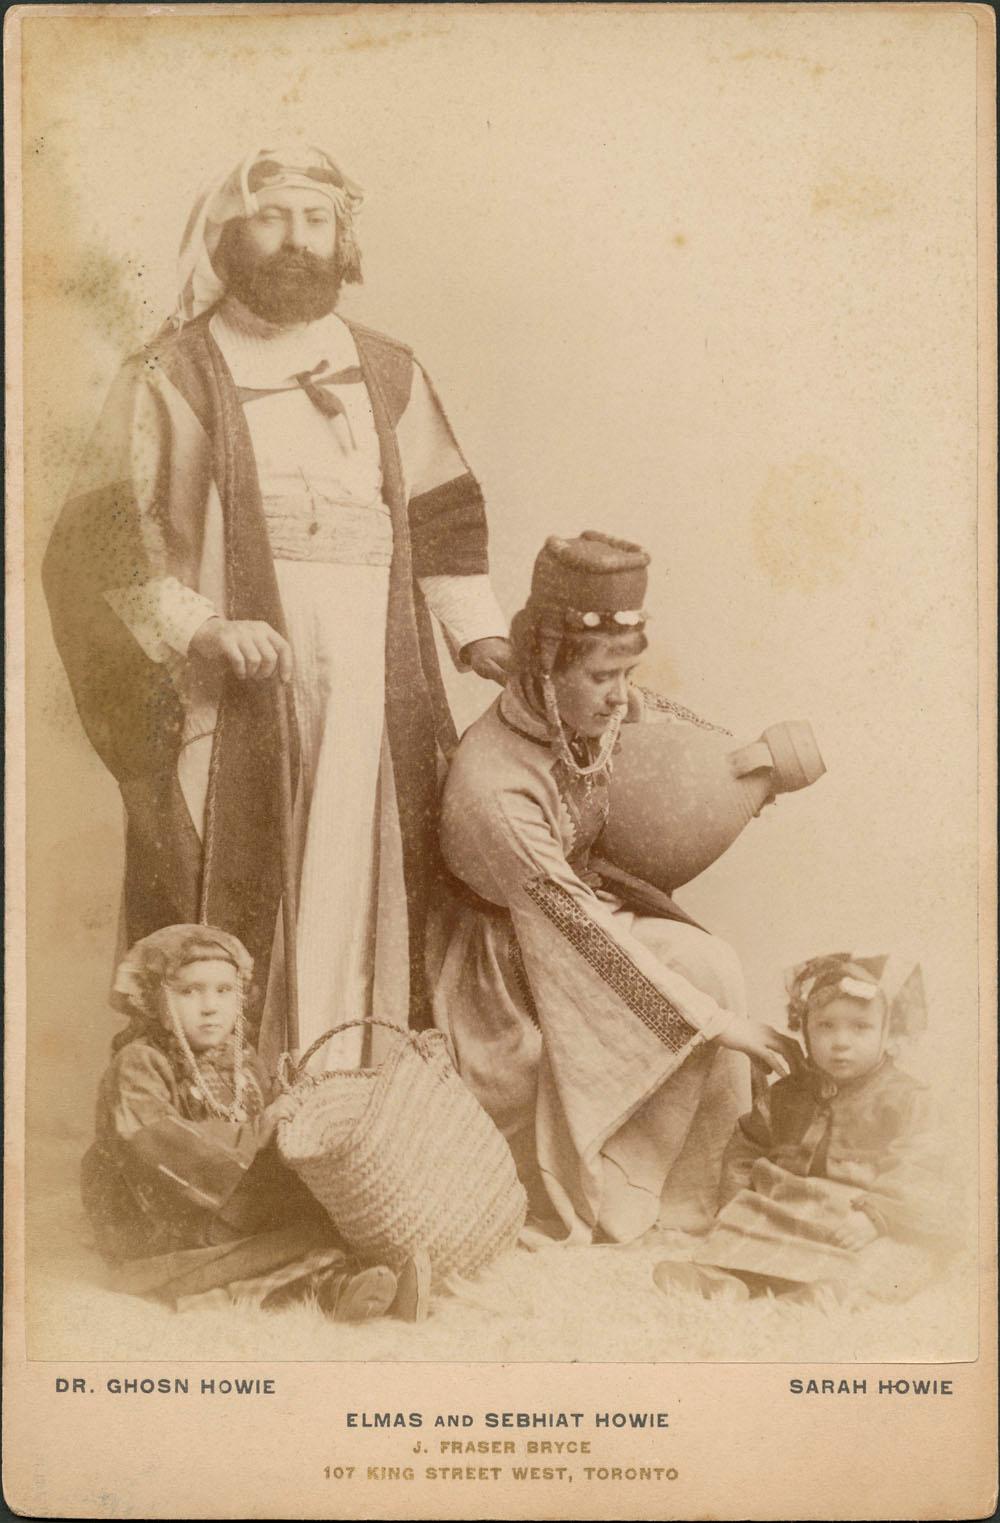 Dr. Ghosn Howie, Sarah Howie and children Elmas and Sebhiat Howie (1892) J. Fraser Bryce (Canadian, 1852 -?